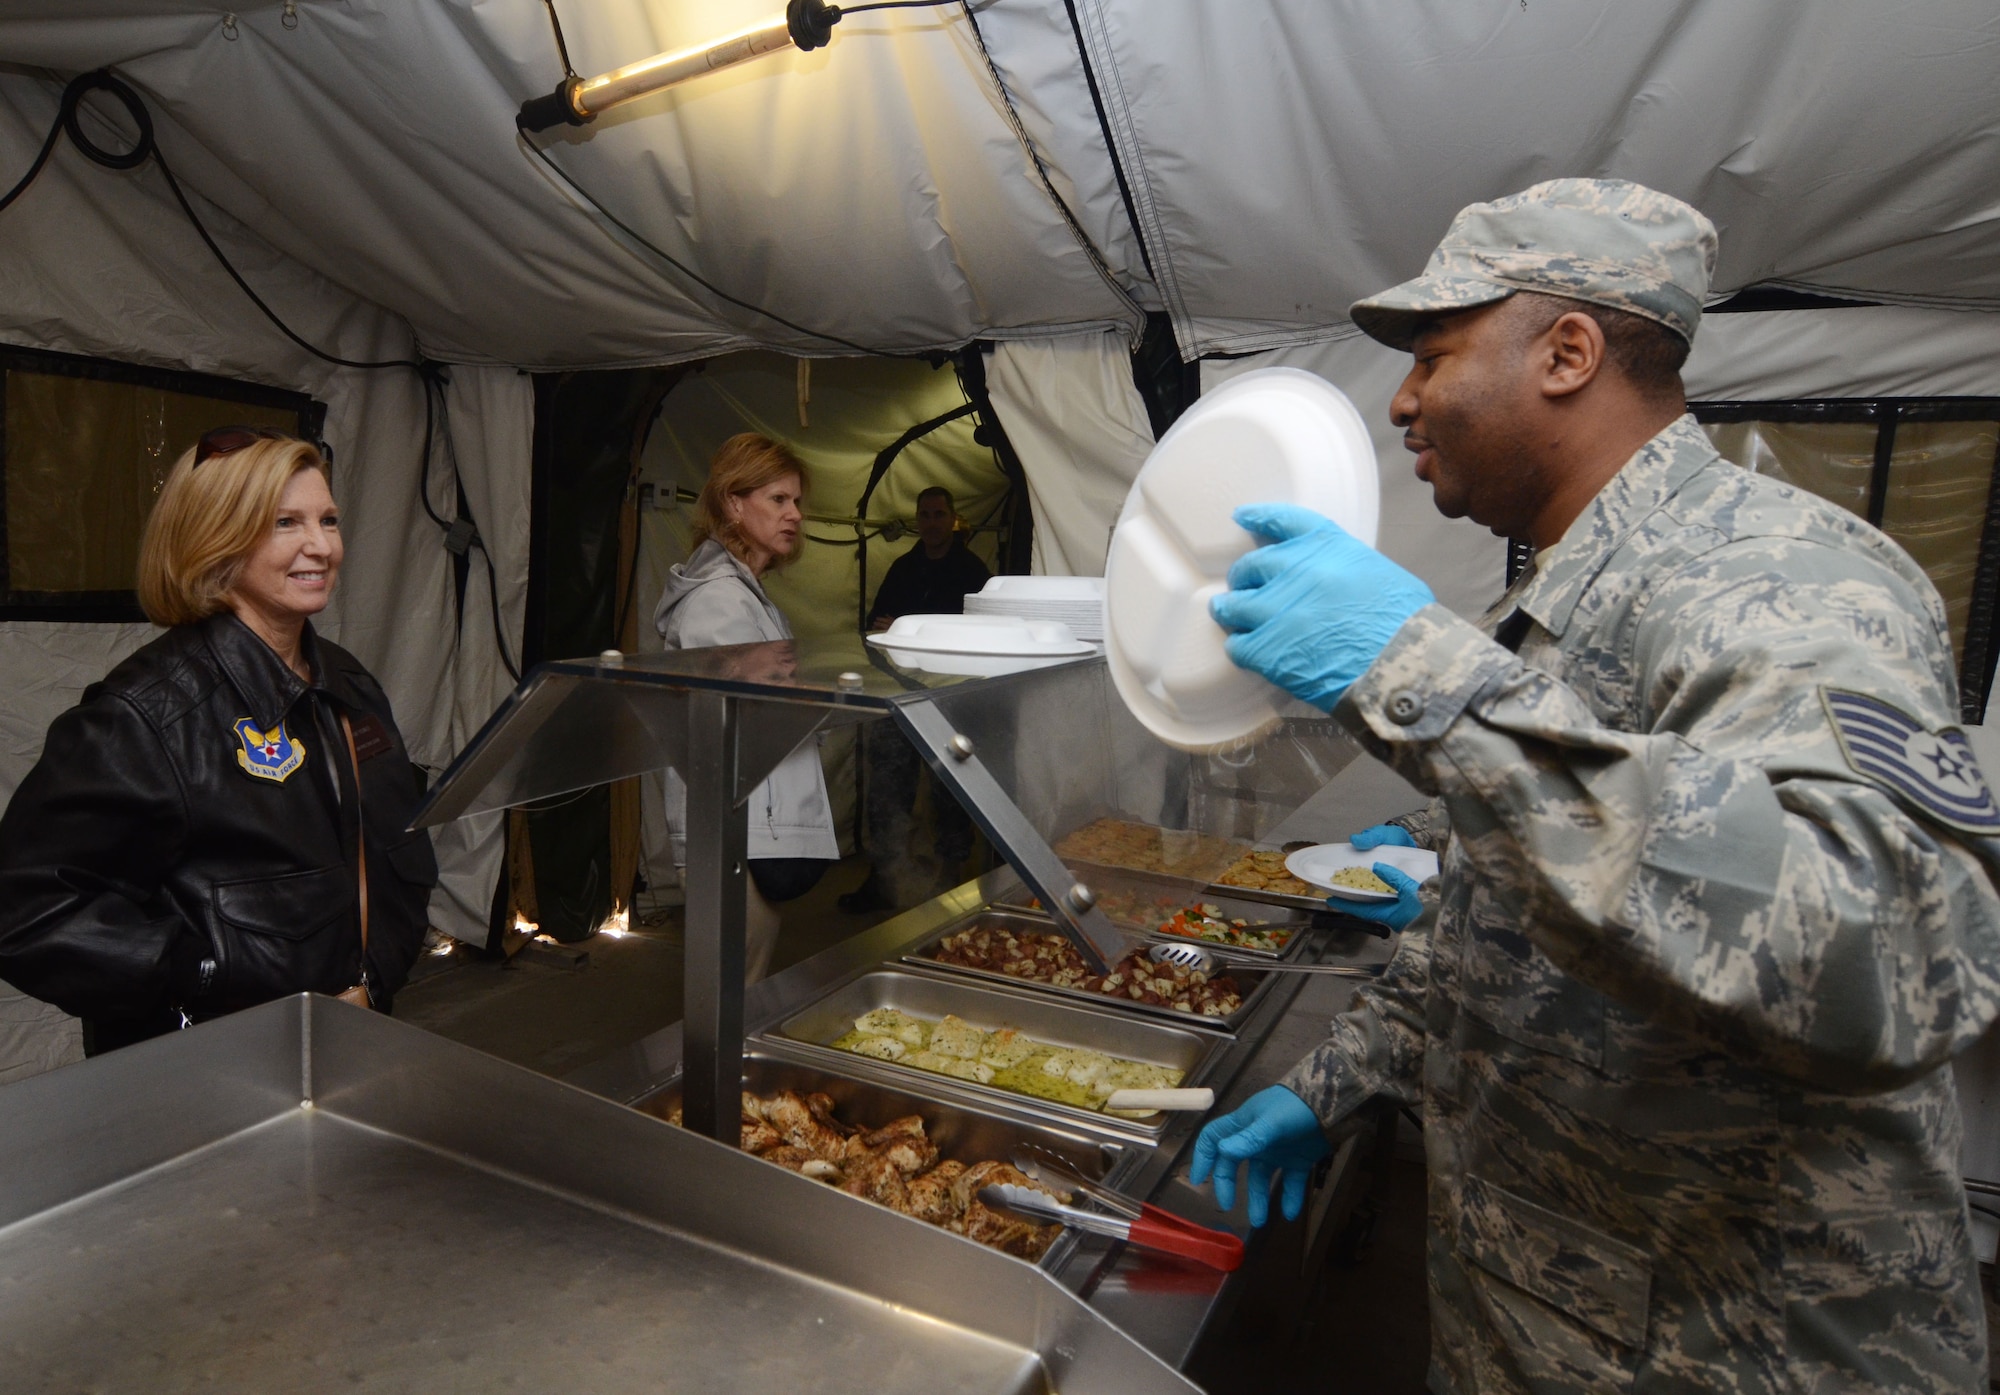 Members of the Honorary Commanders Association experience lunch in a field kitchen dining facility during Dobbins Day, while touring Dobbins Air Reserve Base, Ga. Feb. 12, 2016. (U.S. Air Force photo/Don Peek)